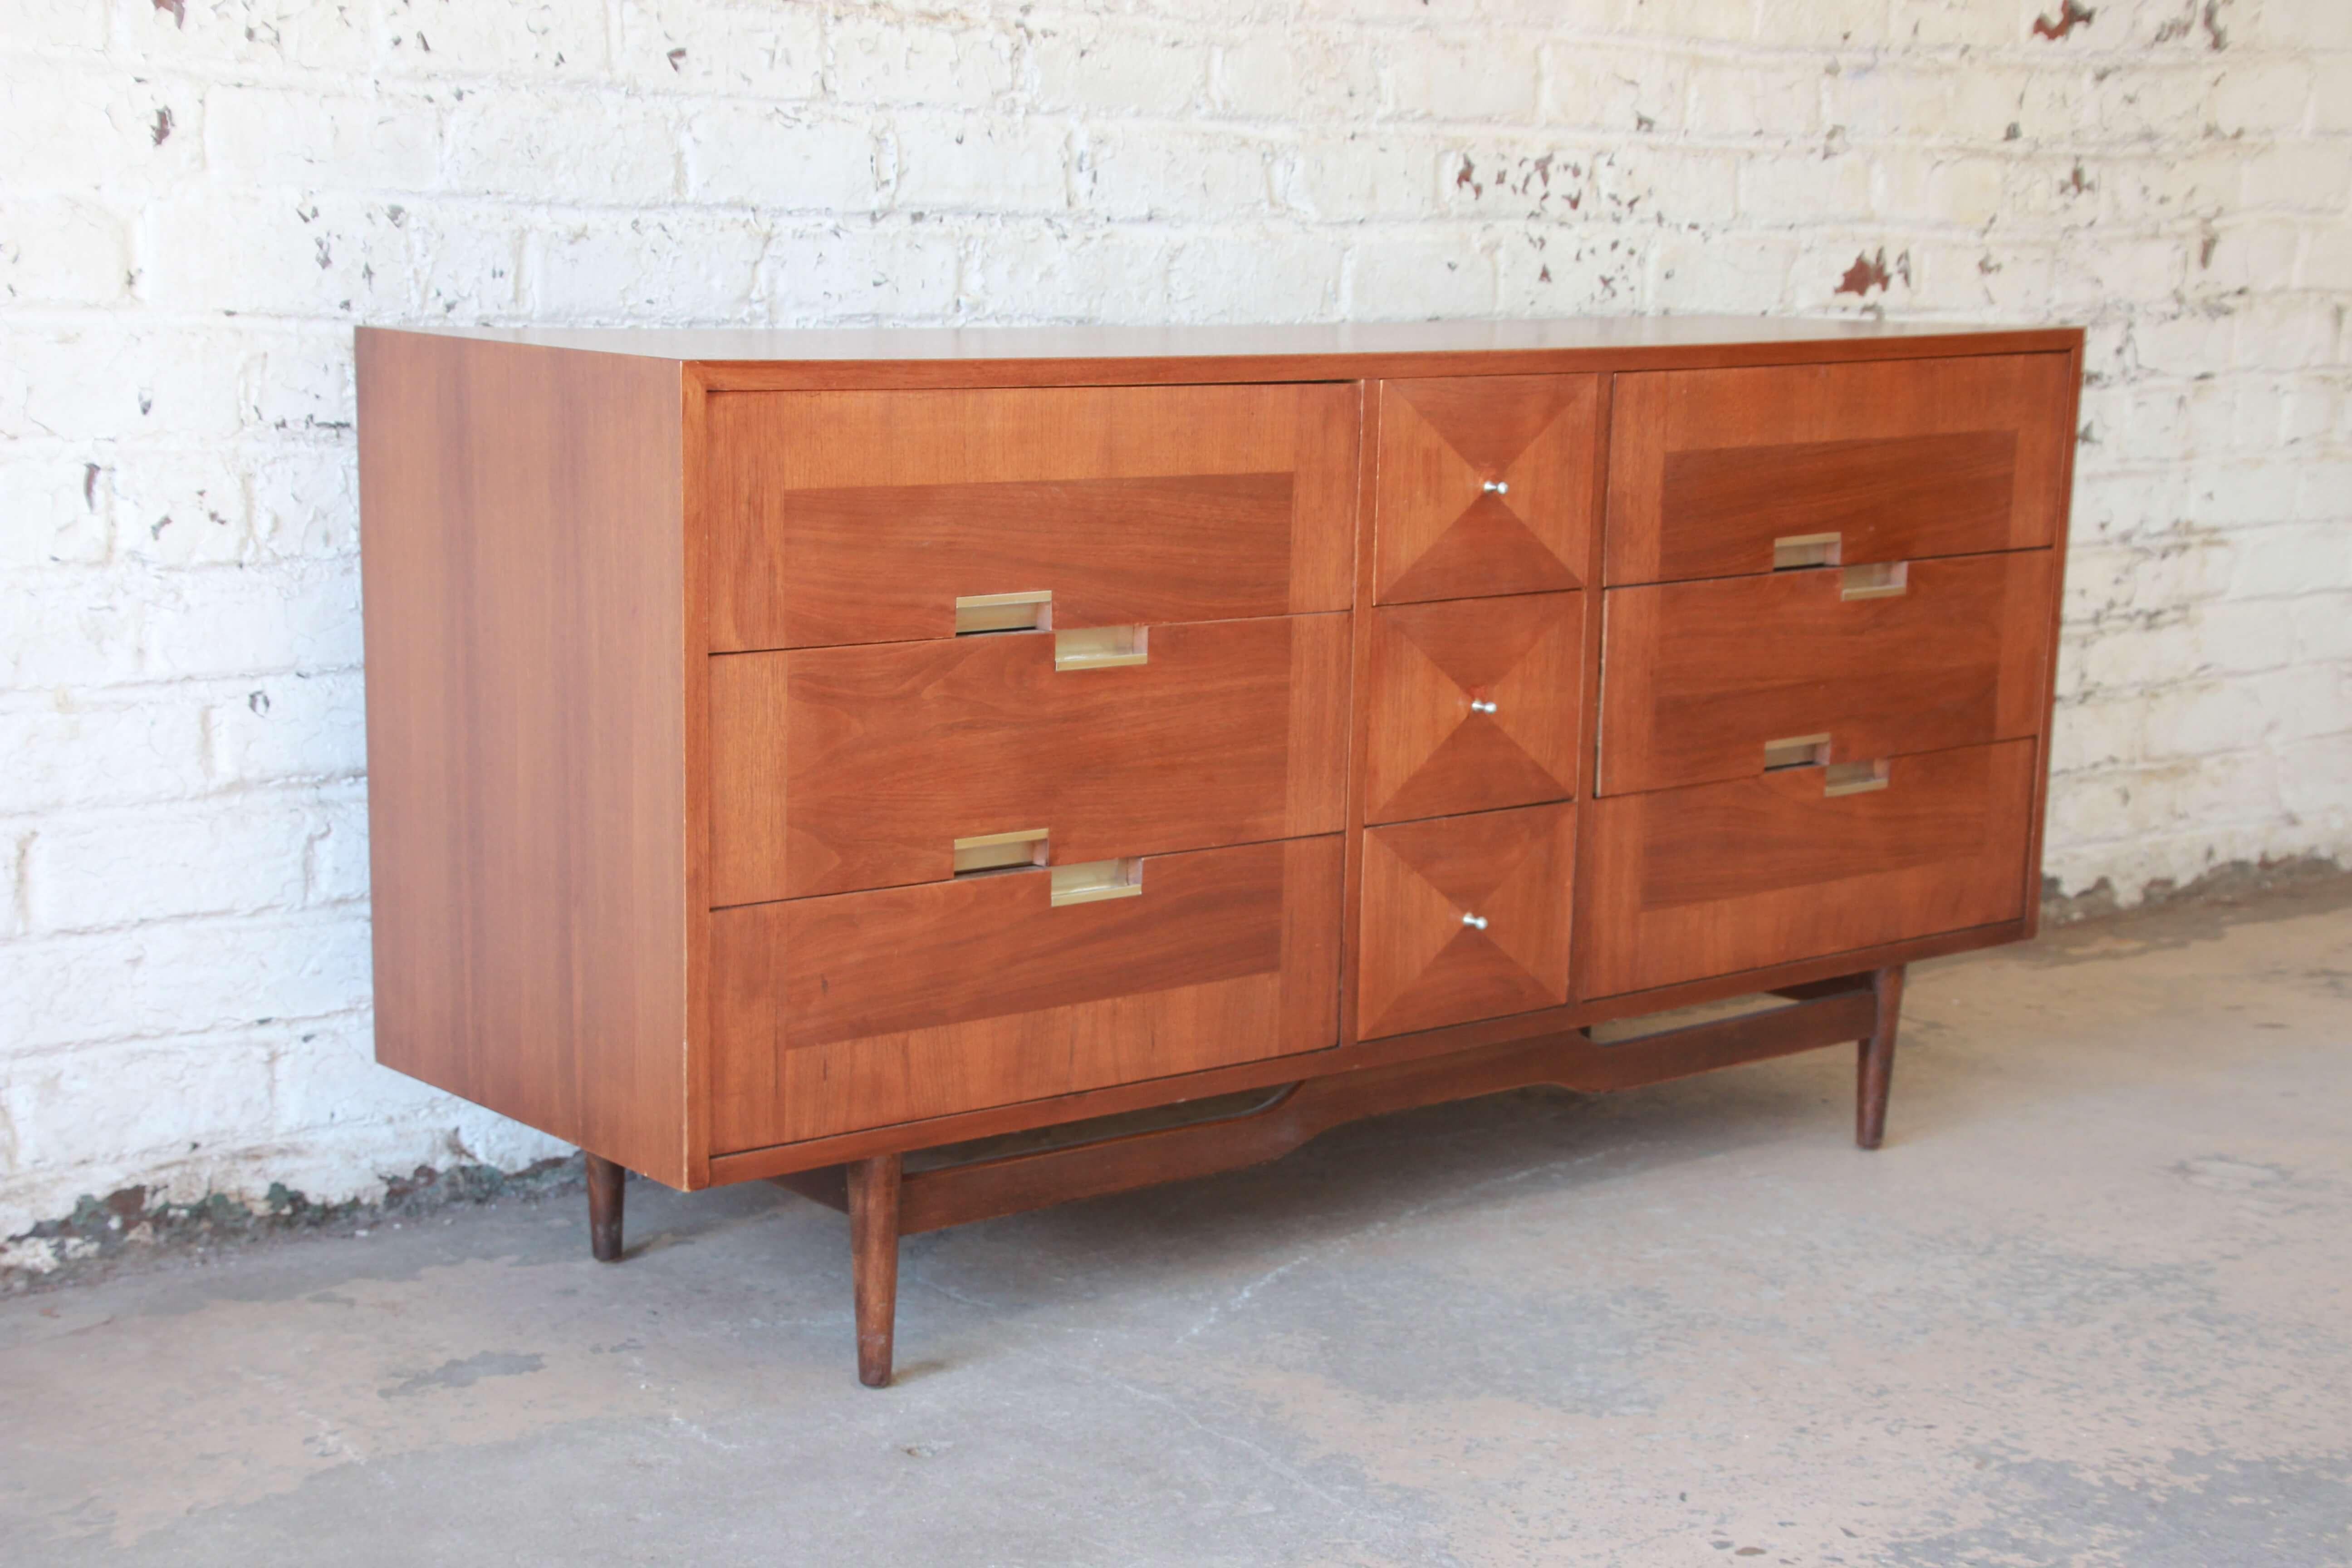 Offering a nice Mid-Century Modern dresser or credenza by Merton Gershun for American of Martinsville. The dresser offers three drawers on each side with aluminum offset pulls. The centre offers three centre drawers for a total of nine drawers for